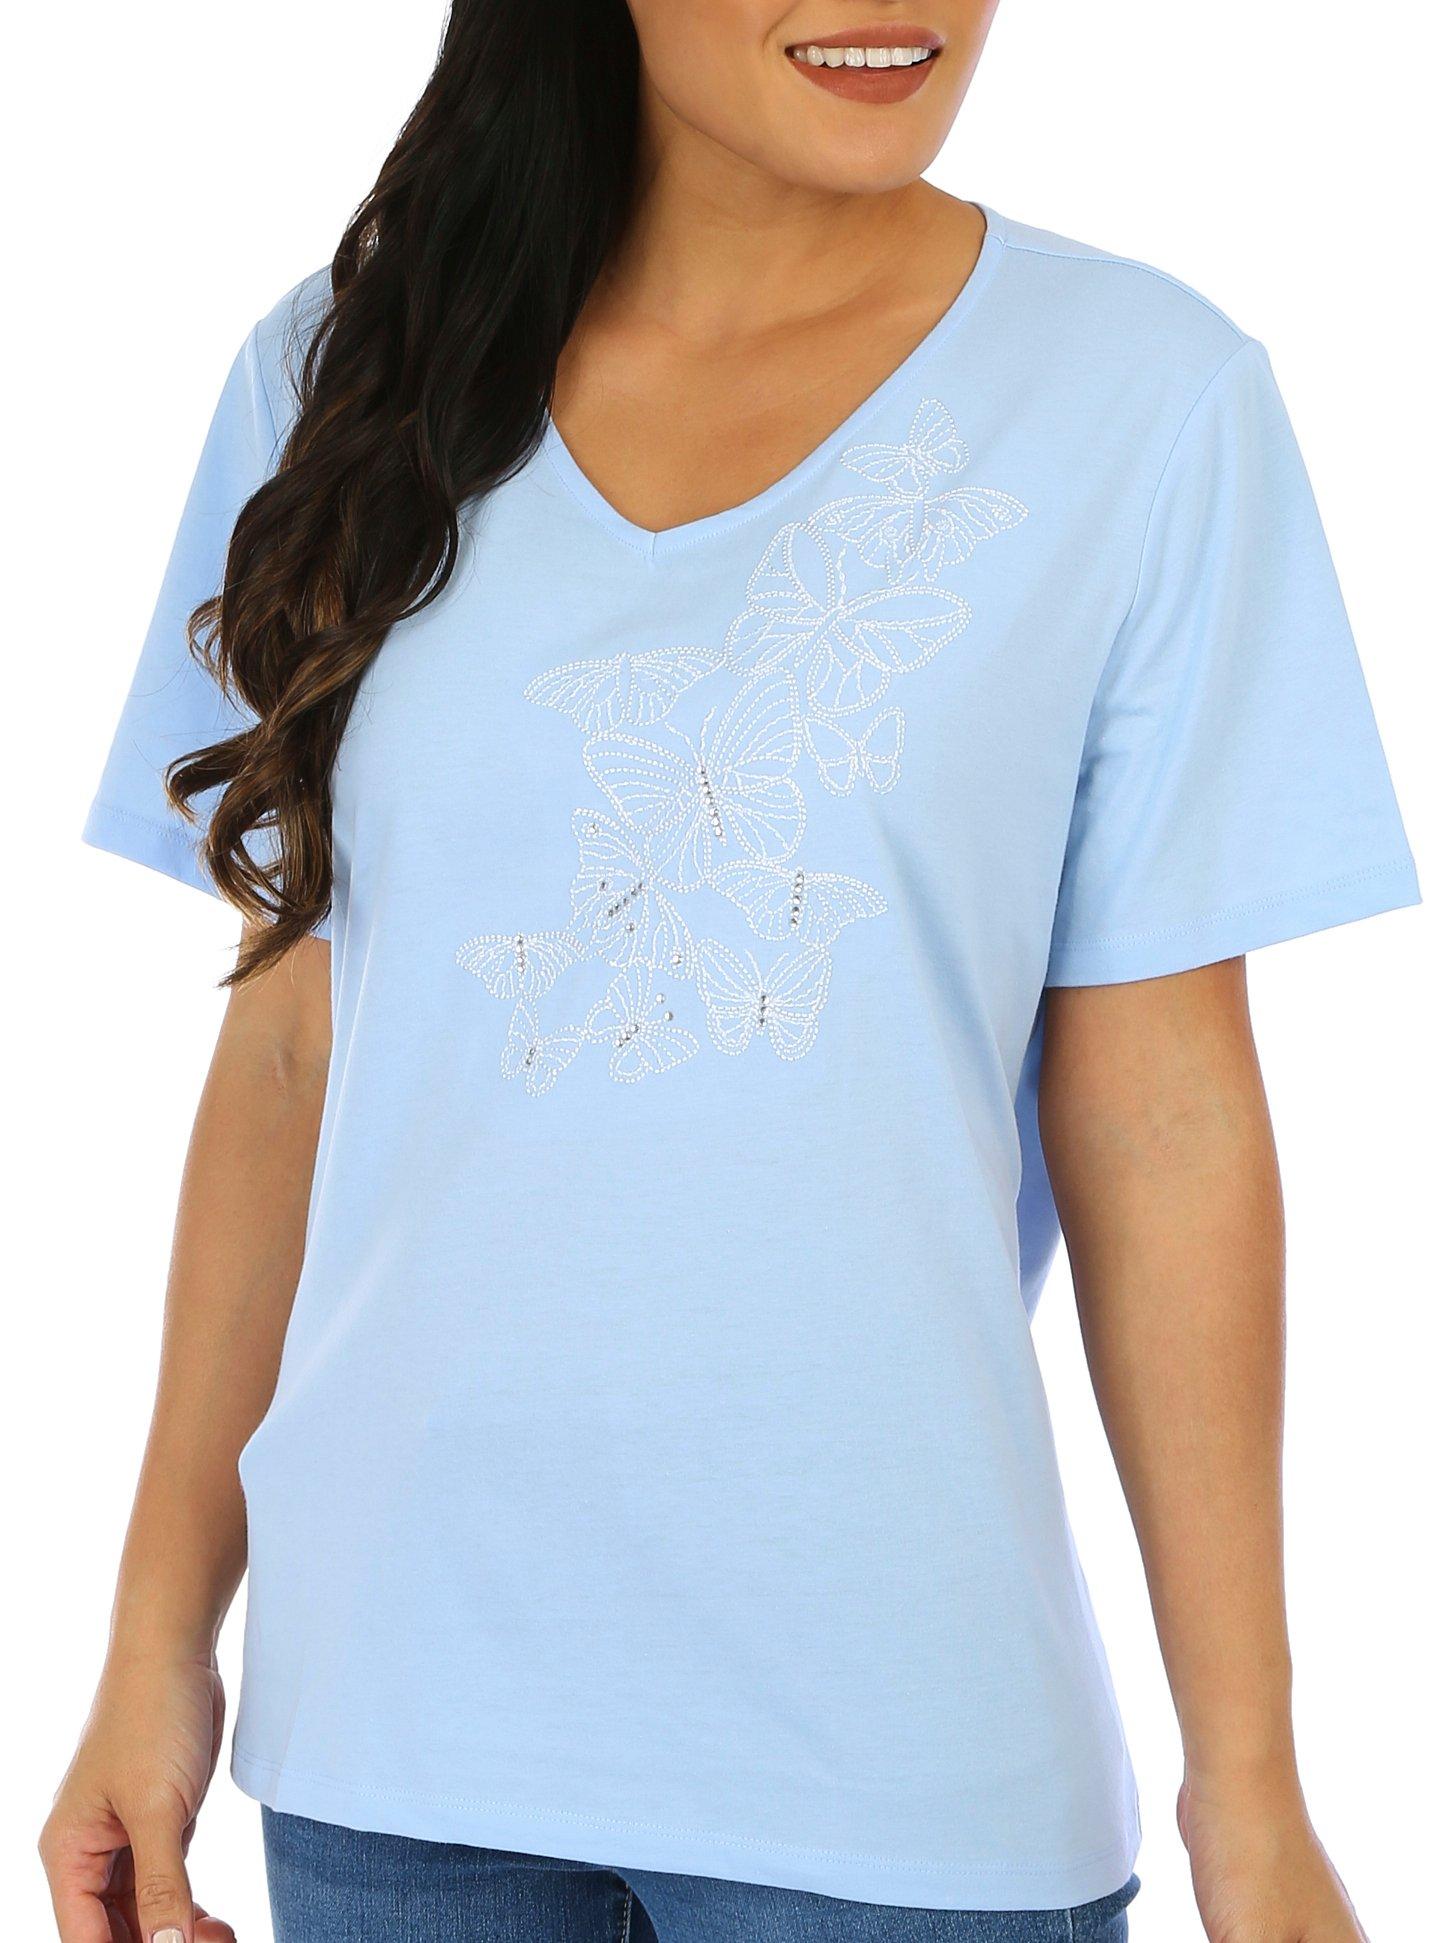 Coral Bay Womens Embroidered Butterflies Short Sleeve Tee